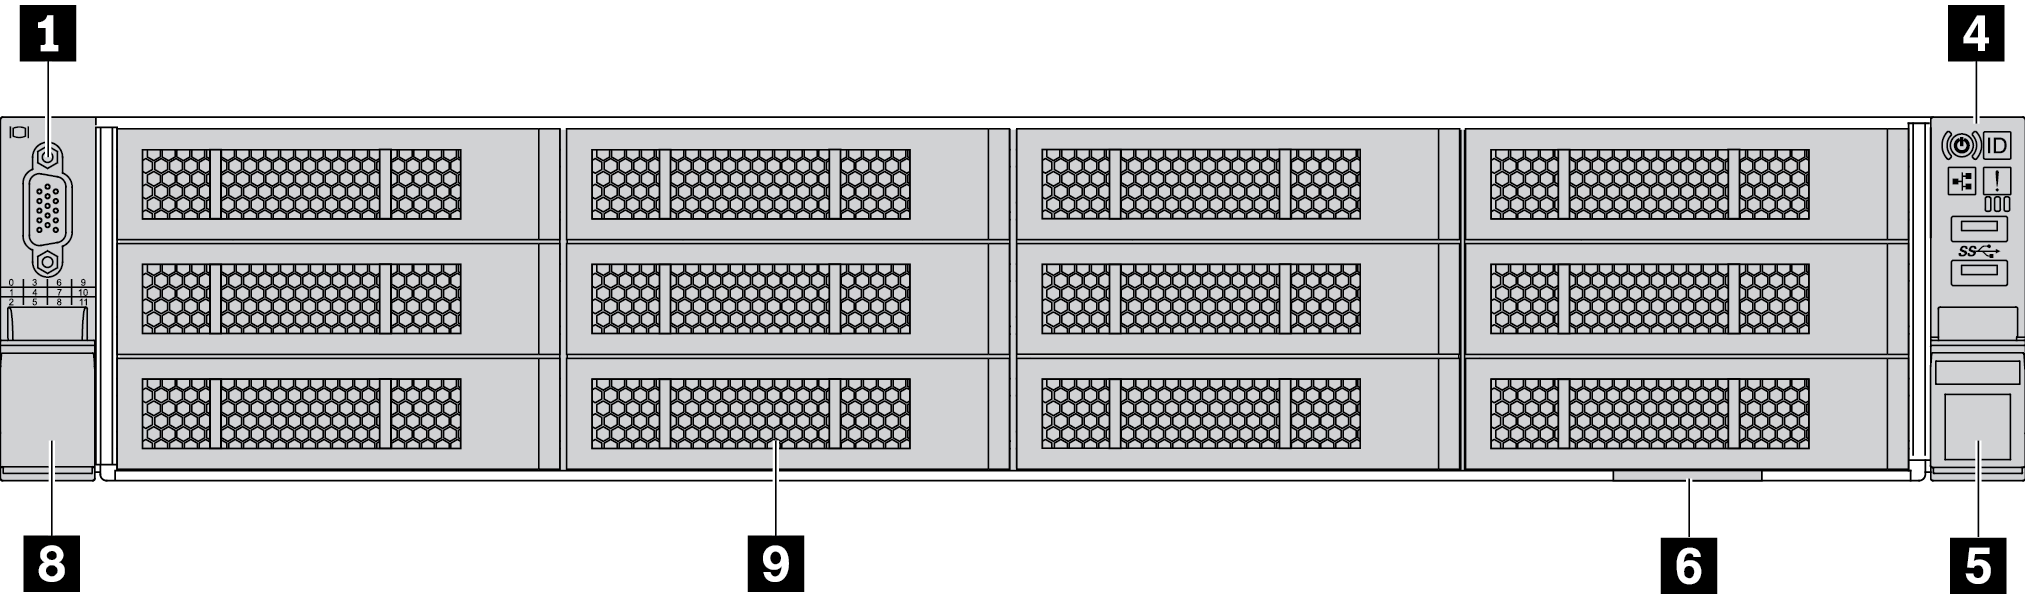 Front view of server model without a backplane